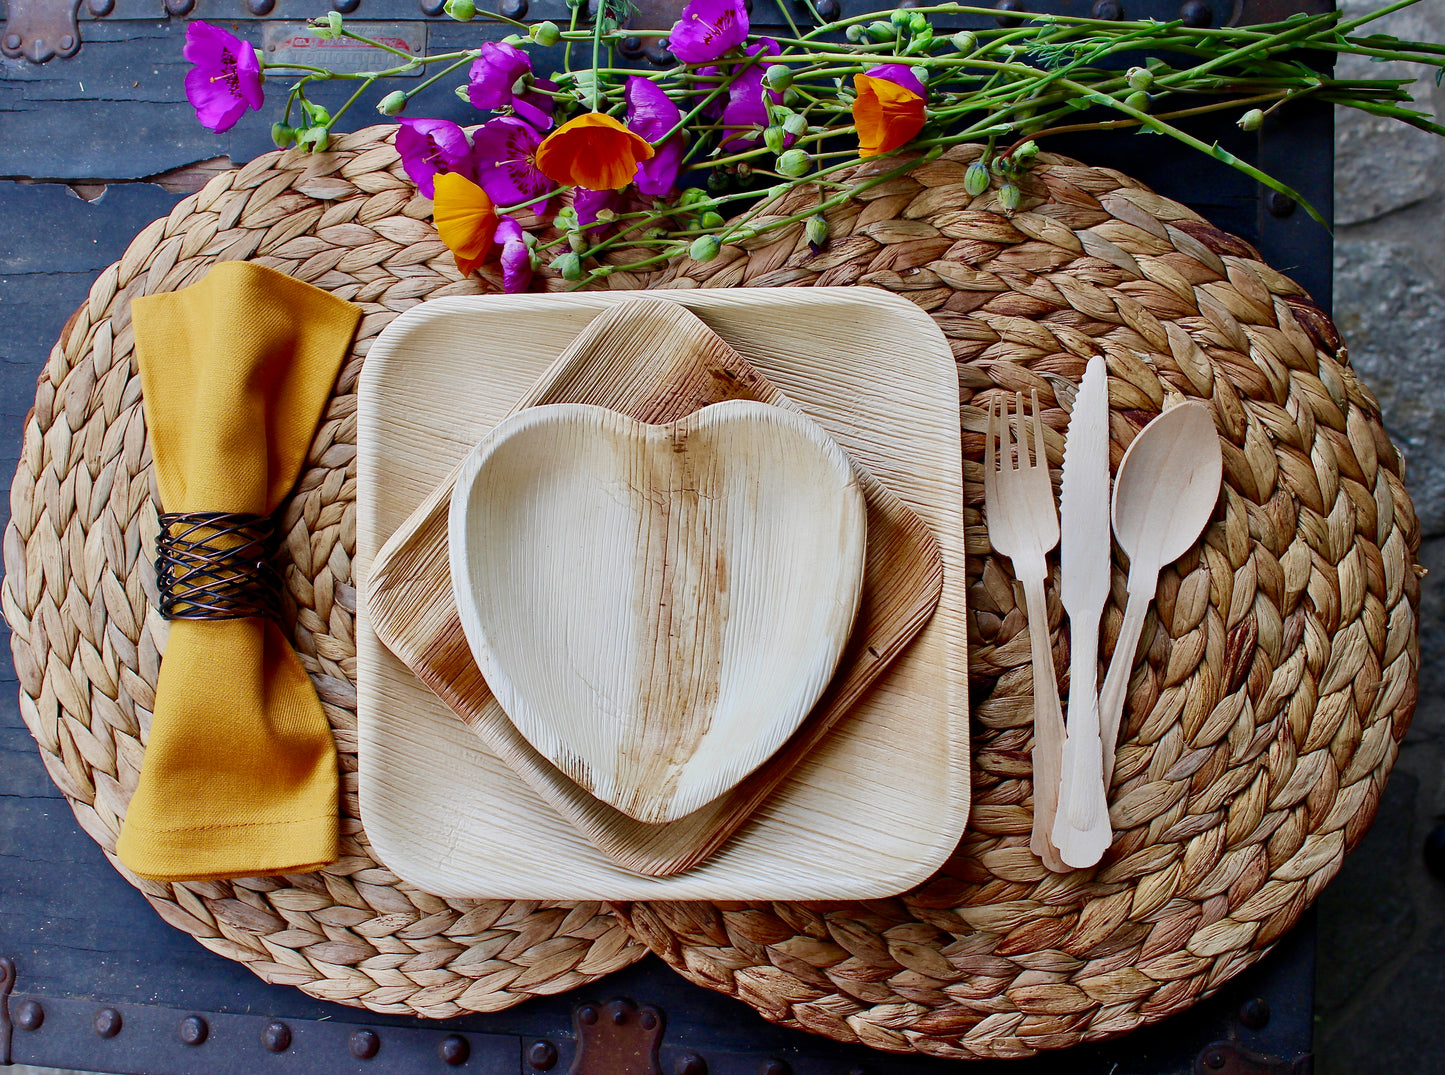 Bamboo Type Palm Leaf plates 10 Pice 9.5" Square- 10 pic heart 6" 30 Pic cutlery  and 10 pice Napkin